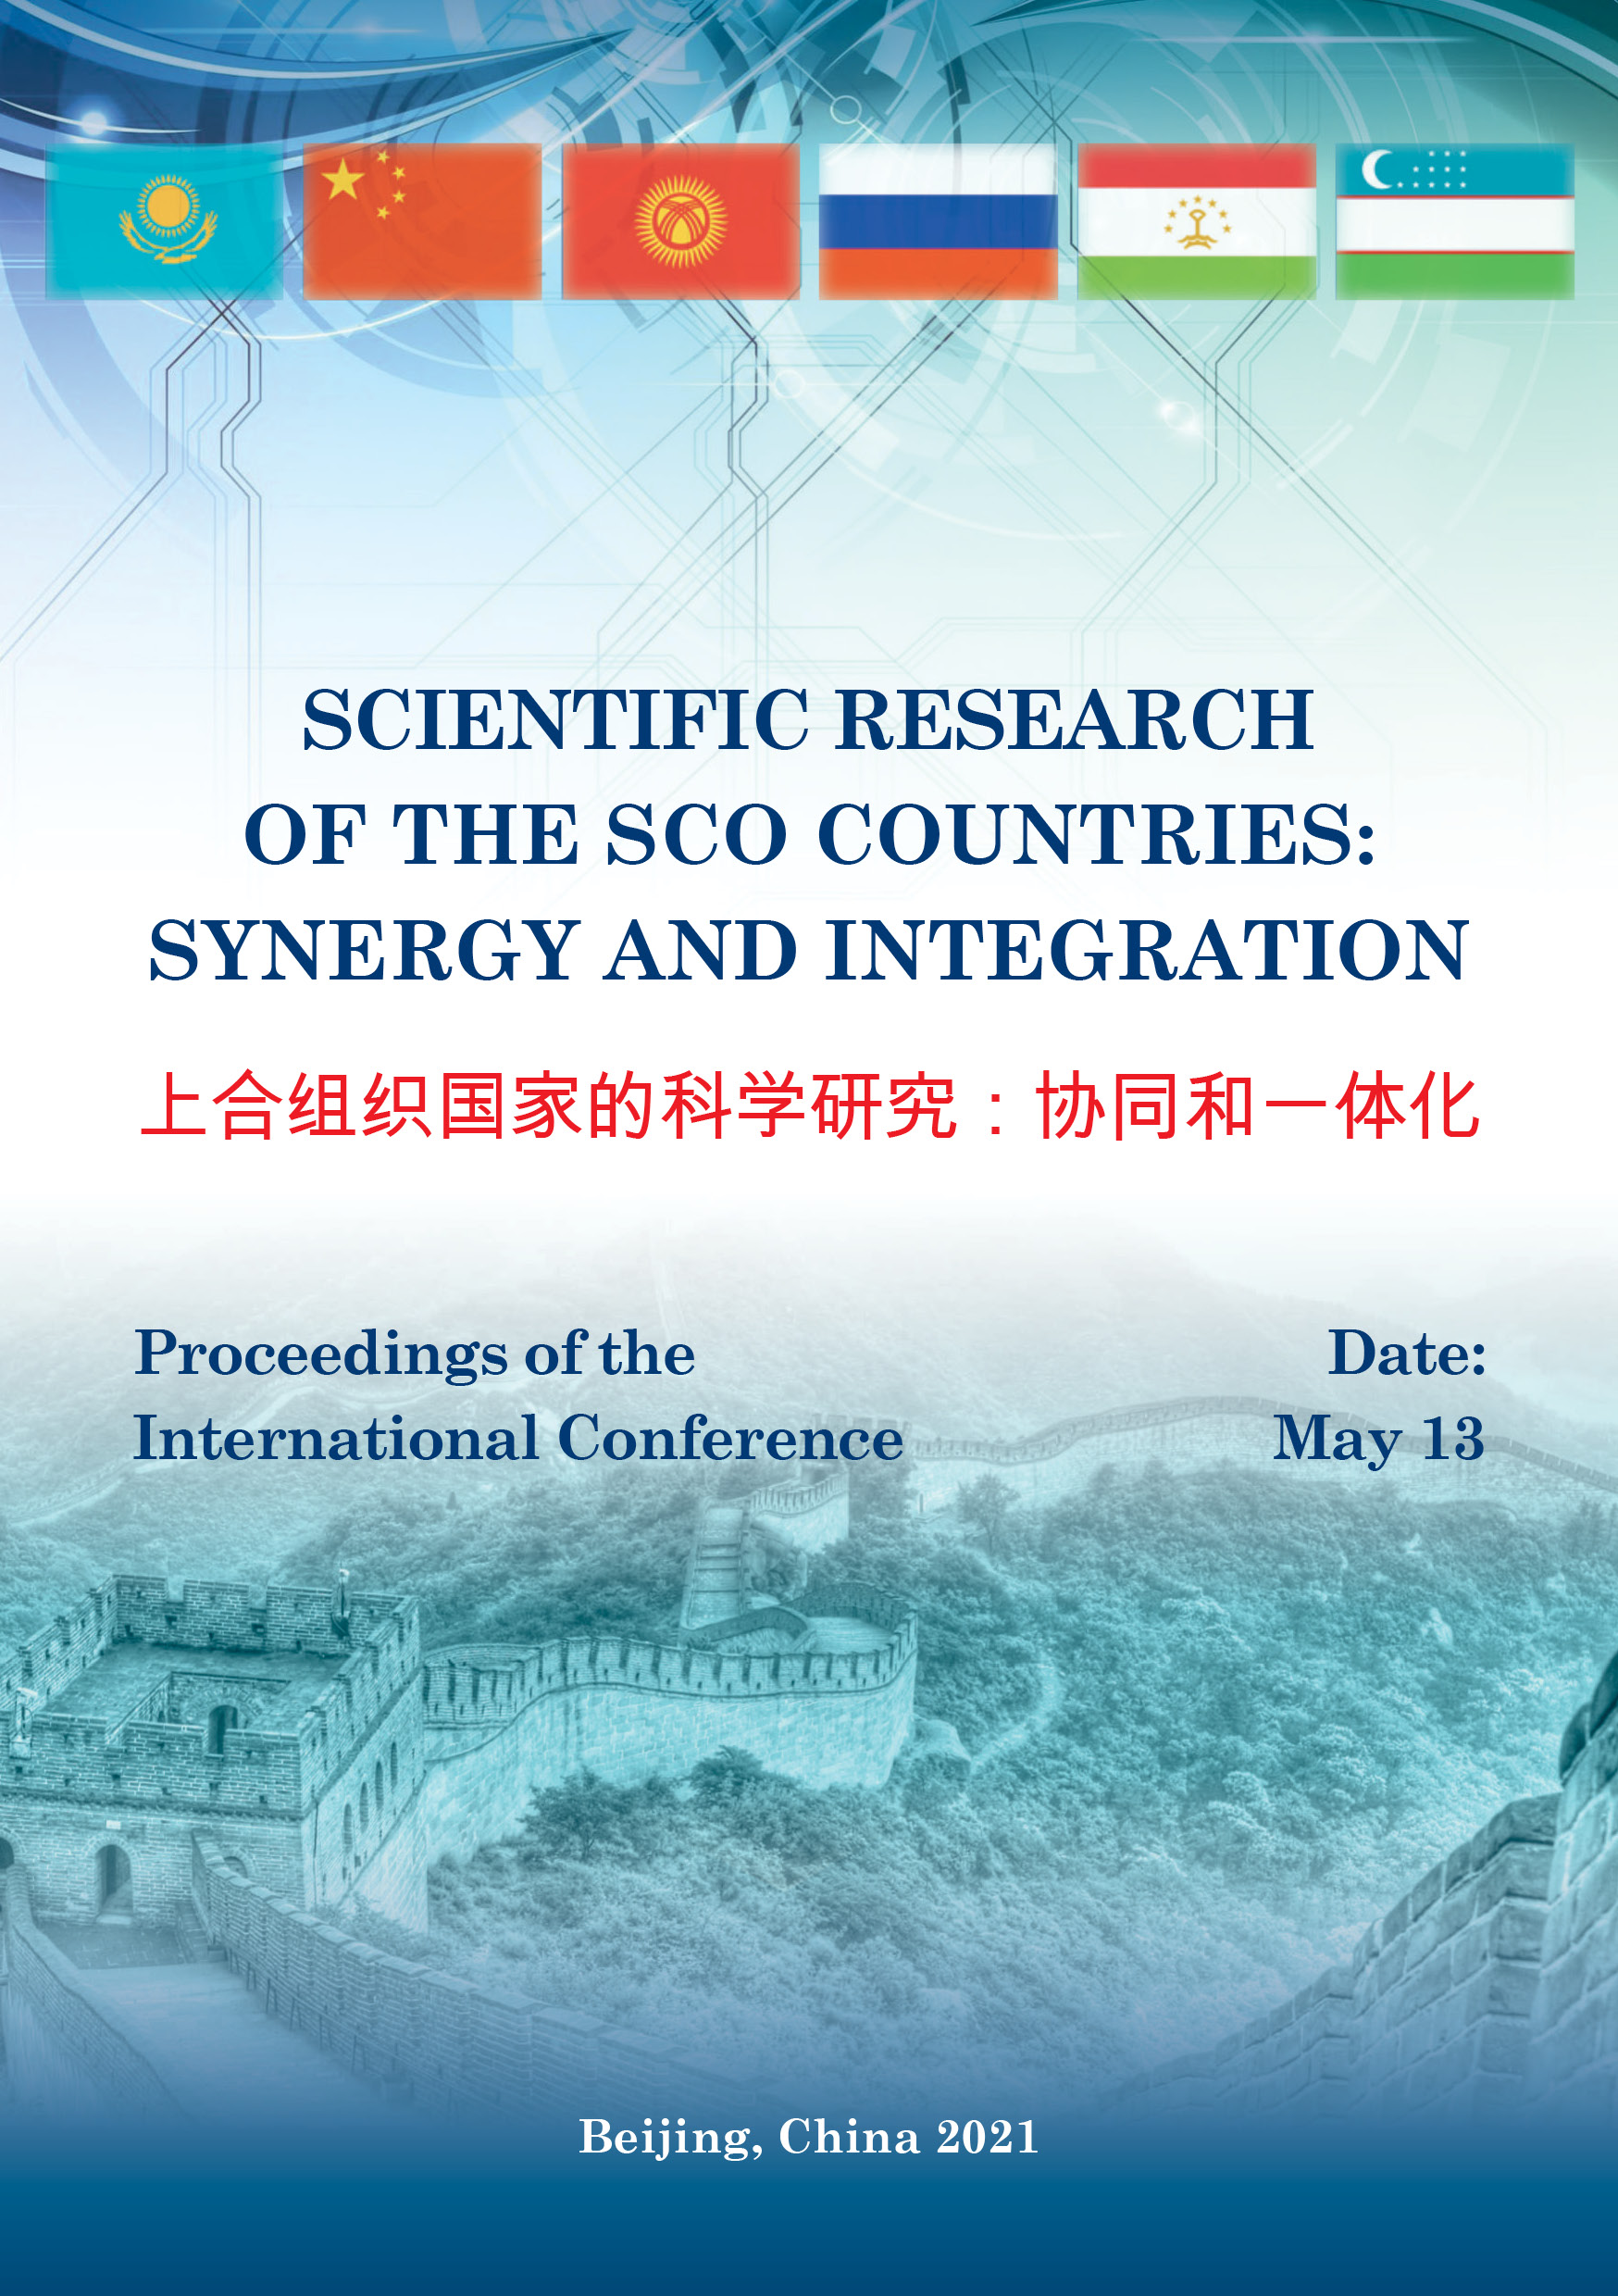                         SCIENTIFIC RESEARCH OF THE SCO COUNTRIES: SYNERGY AND INTEGRATION. PART 2
            